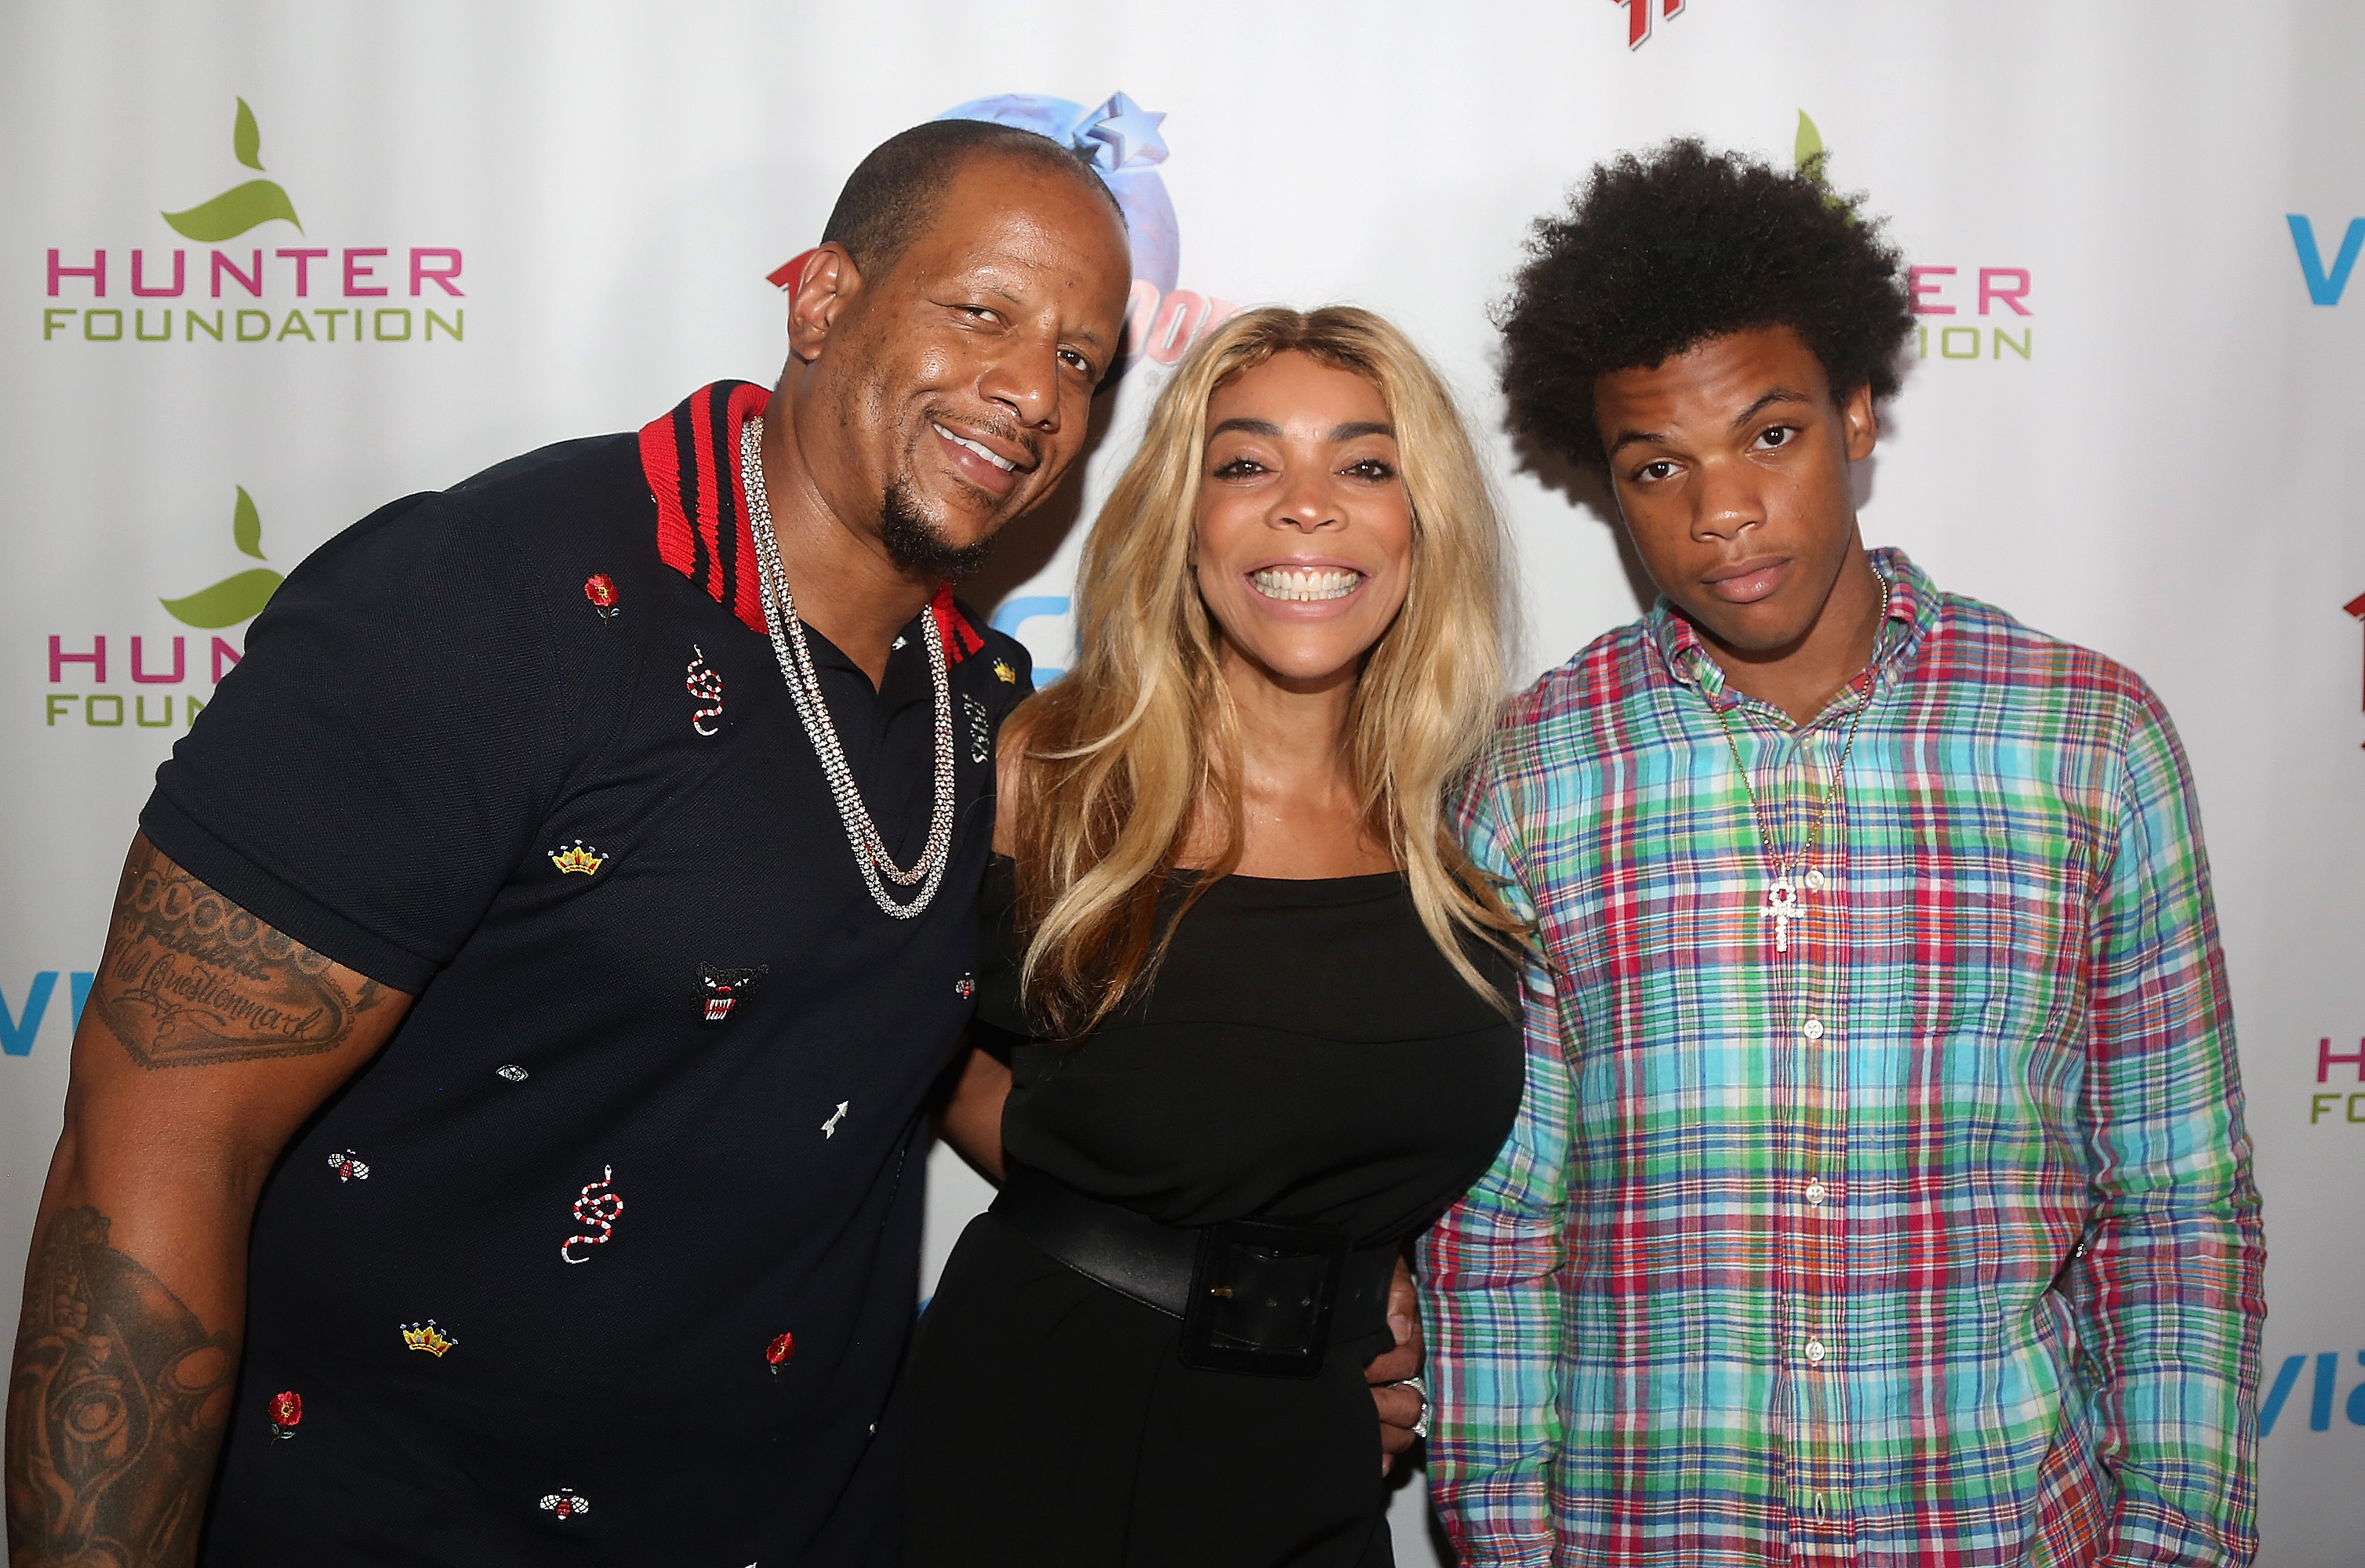 EW YORK, NY - JULY 11: (EXCLUSIVE COVERAGE)(L-R) Kevin Hunter, wife Wendy Williams and son Kevin Hunter Jr pose at a celebration for The Hunter Foundation Charity that helps fund programs for families and youth communities in need of help and guidance at Planet Hollywood Times Square on July 11, 2017 in New York City.